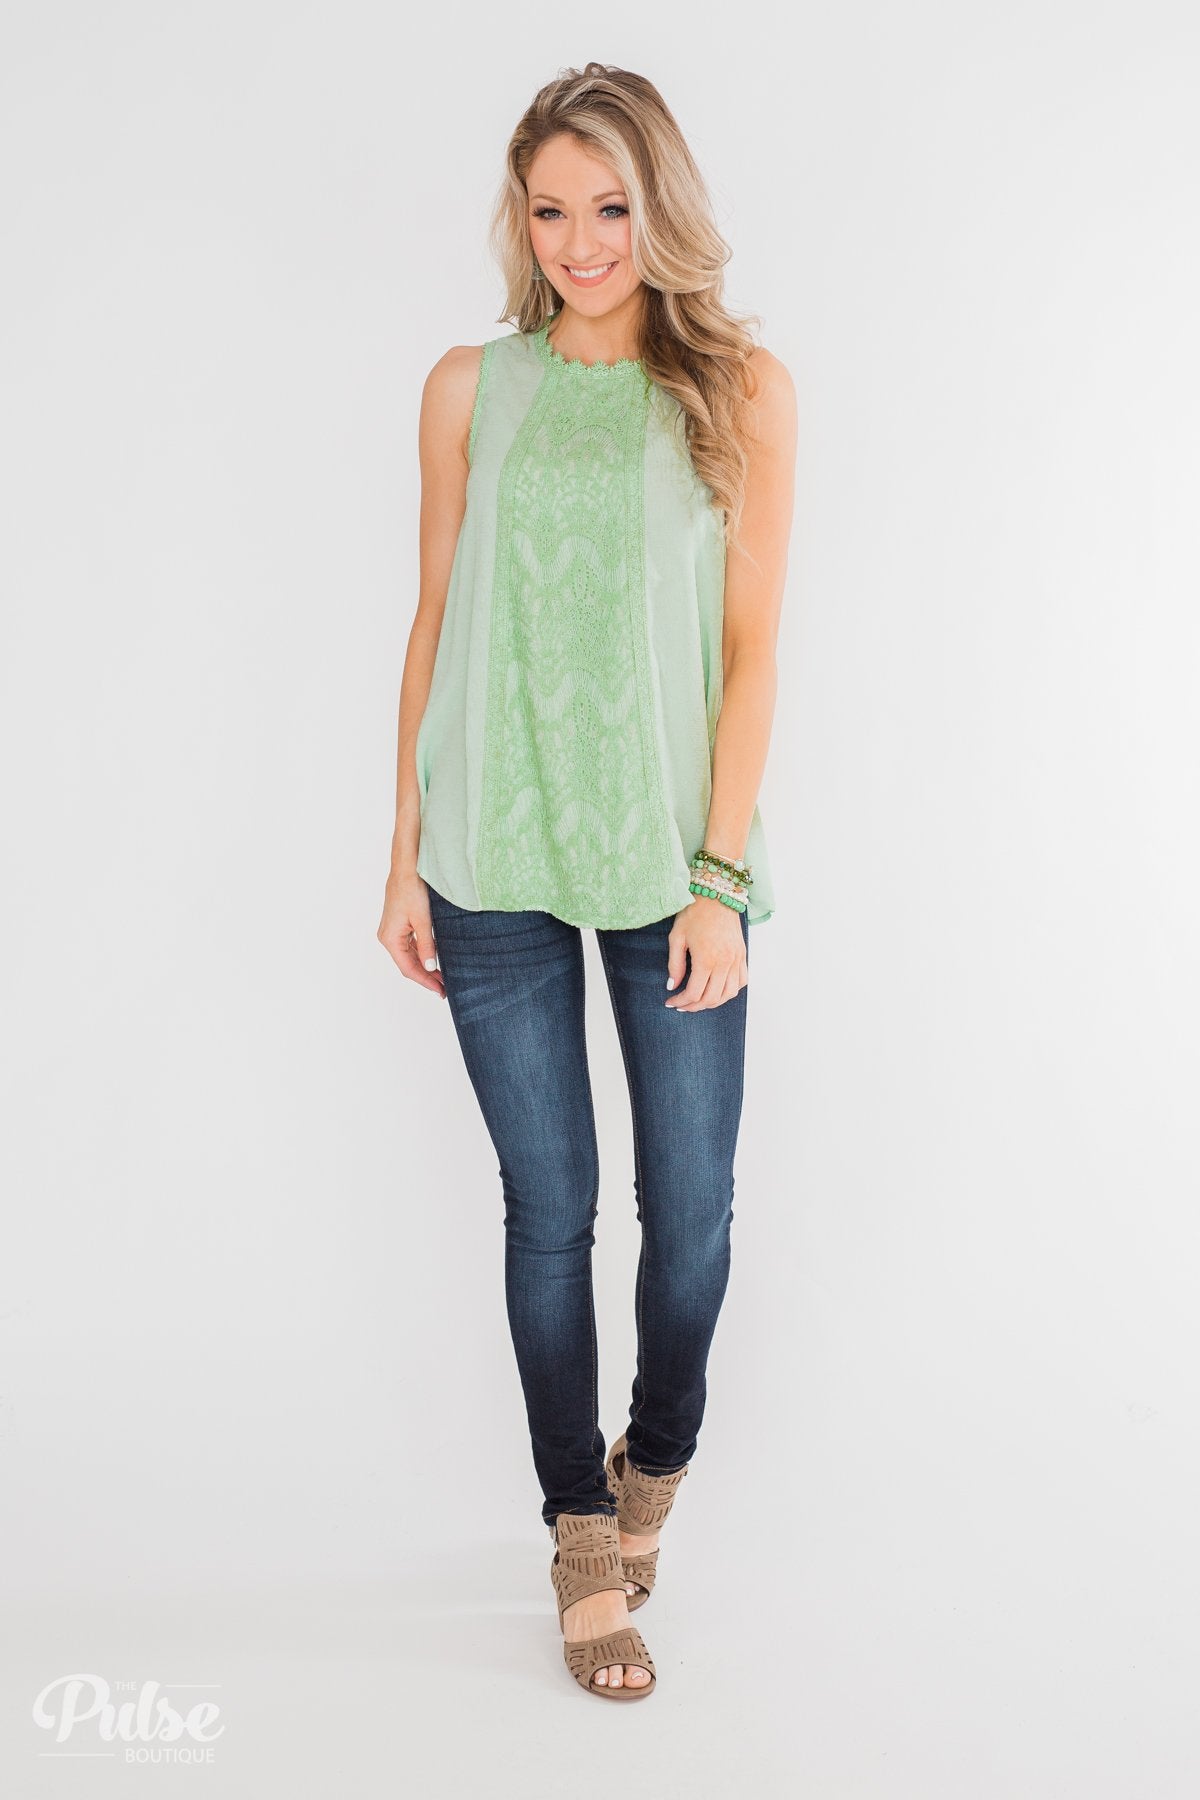 Every Little Thing Racerback Lace Tank Top- Mint Green